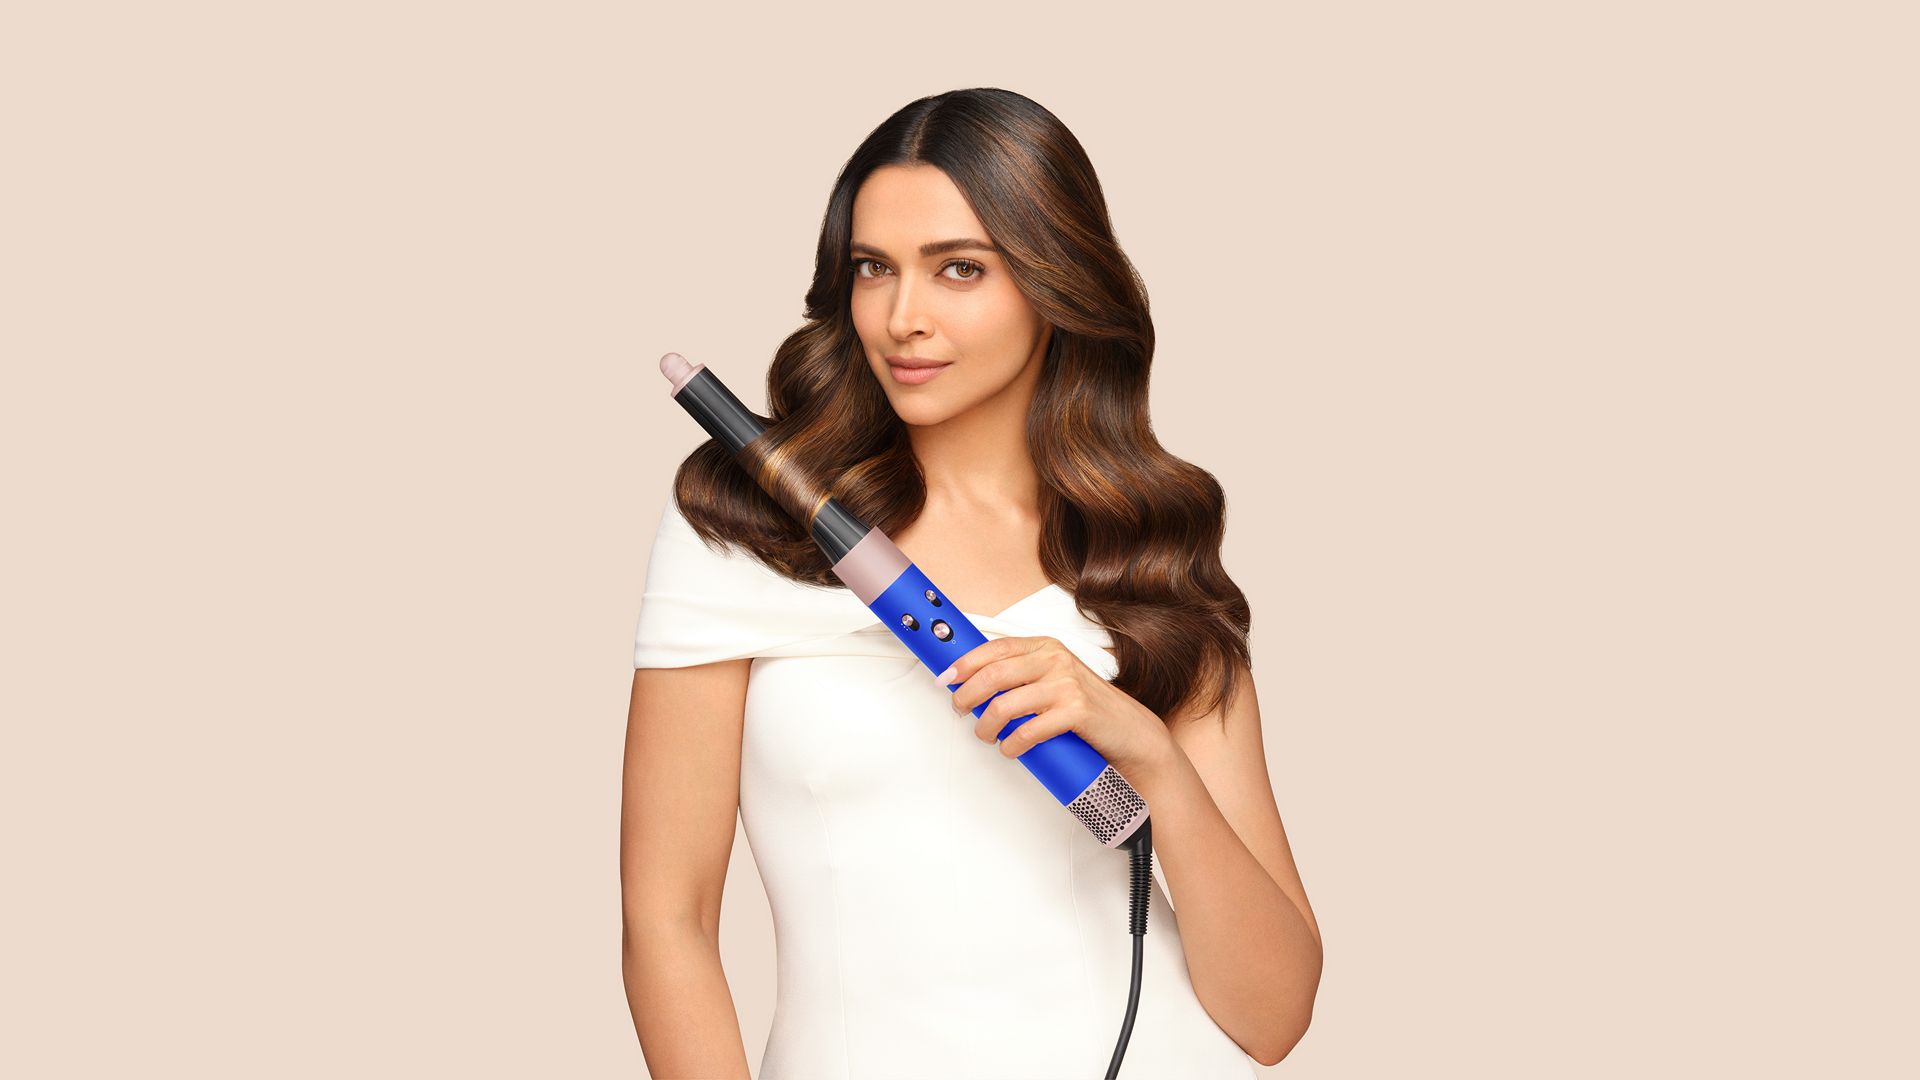 Special edition Dyson Airwrap™ multi-styler Complete Long Blue Blush